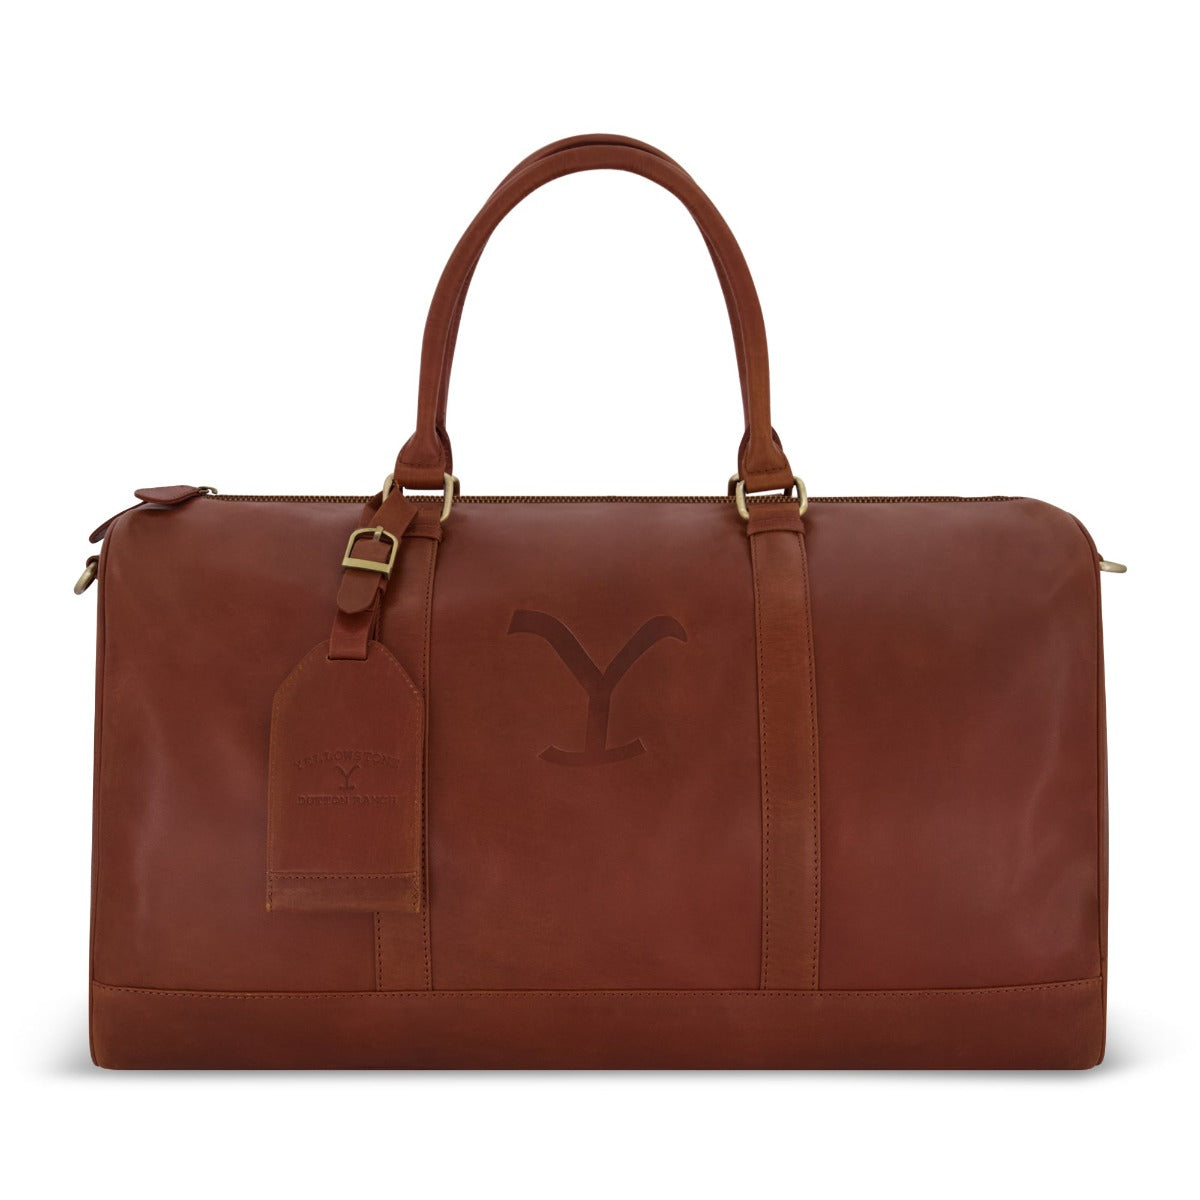 Yellowstone real leather 21 inch duffel bag - best duffles for travel